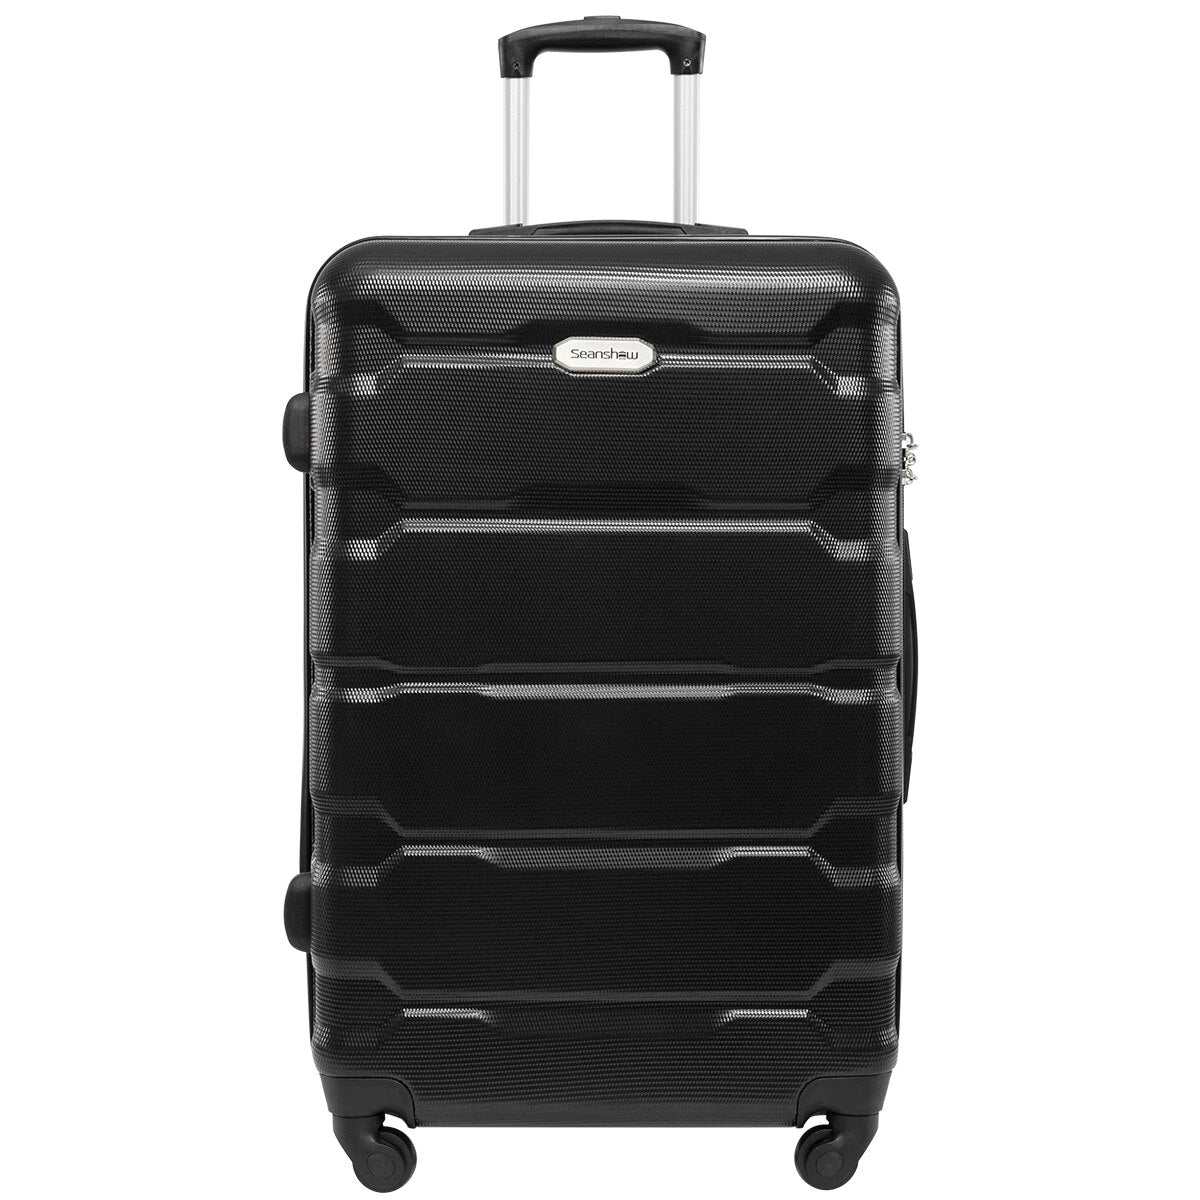 18carry on Cabin suitcase 22/26/30 inch travel suitcase on wheelsrolling luggage set